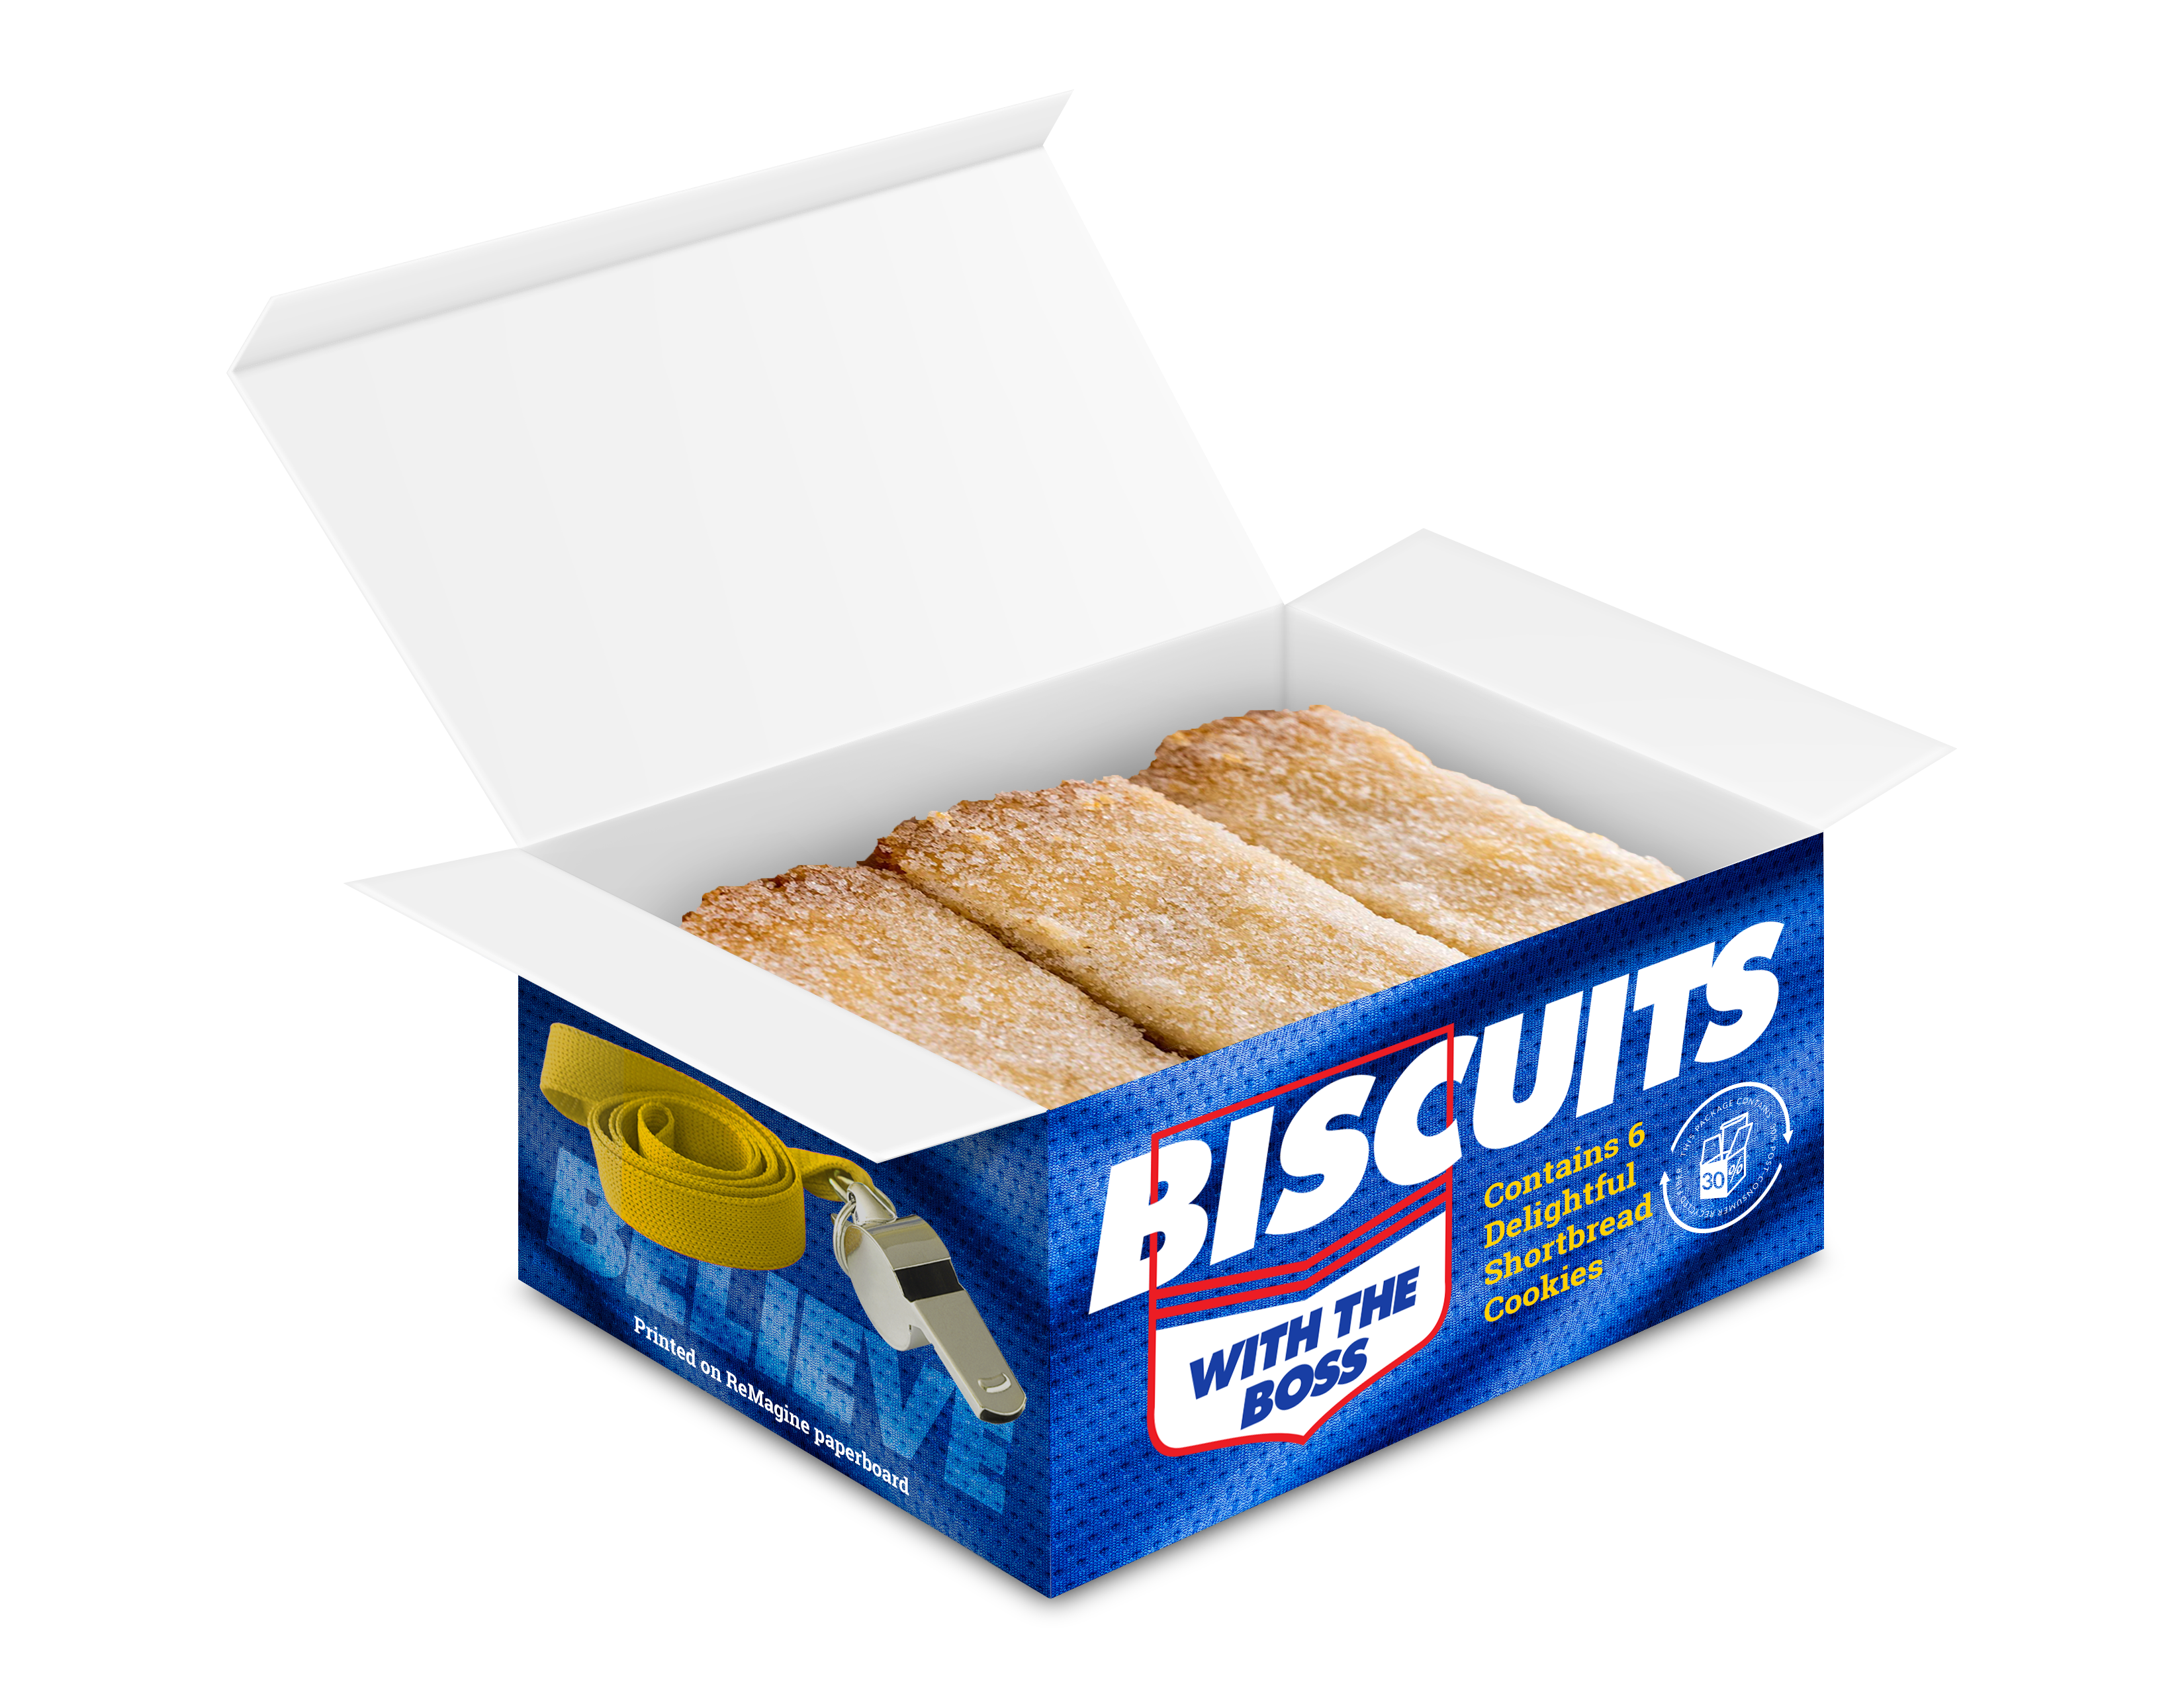 Blue paperboard box of biscuits